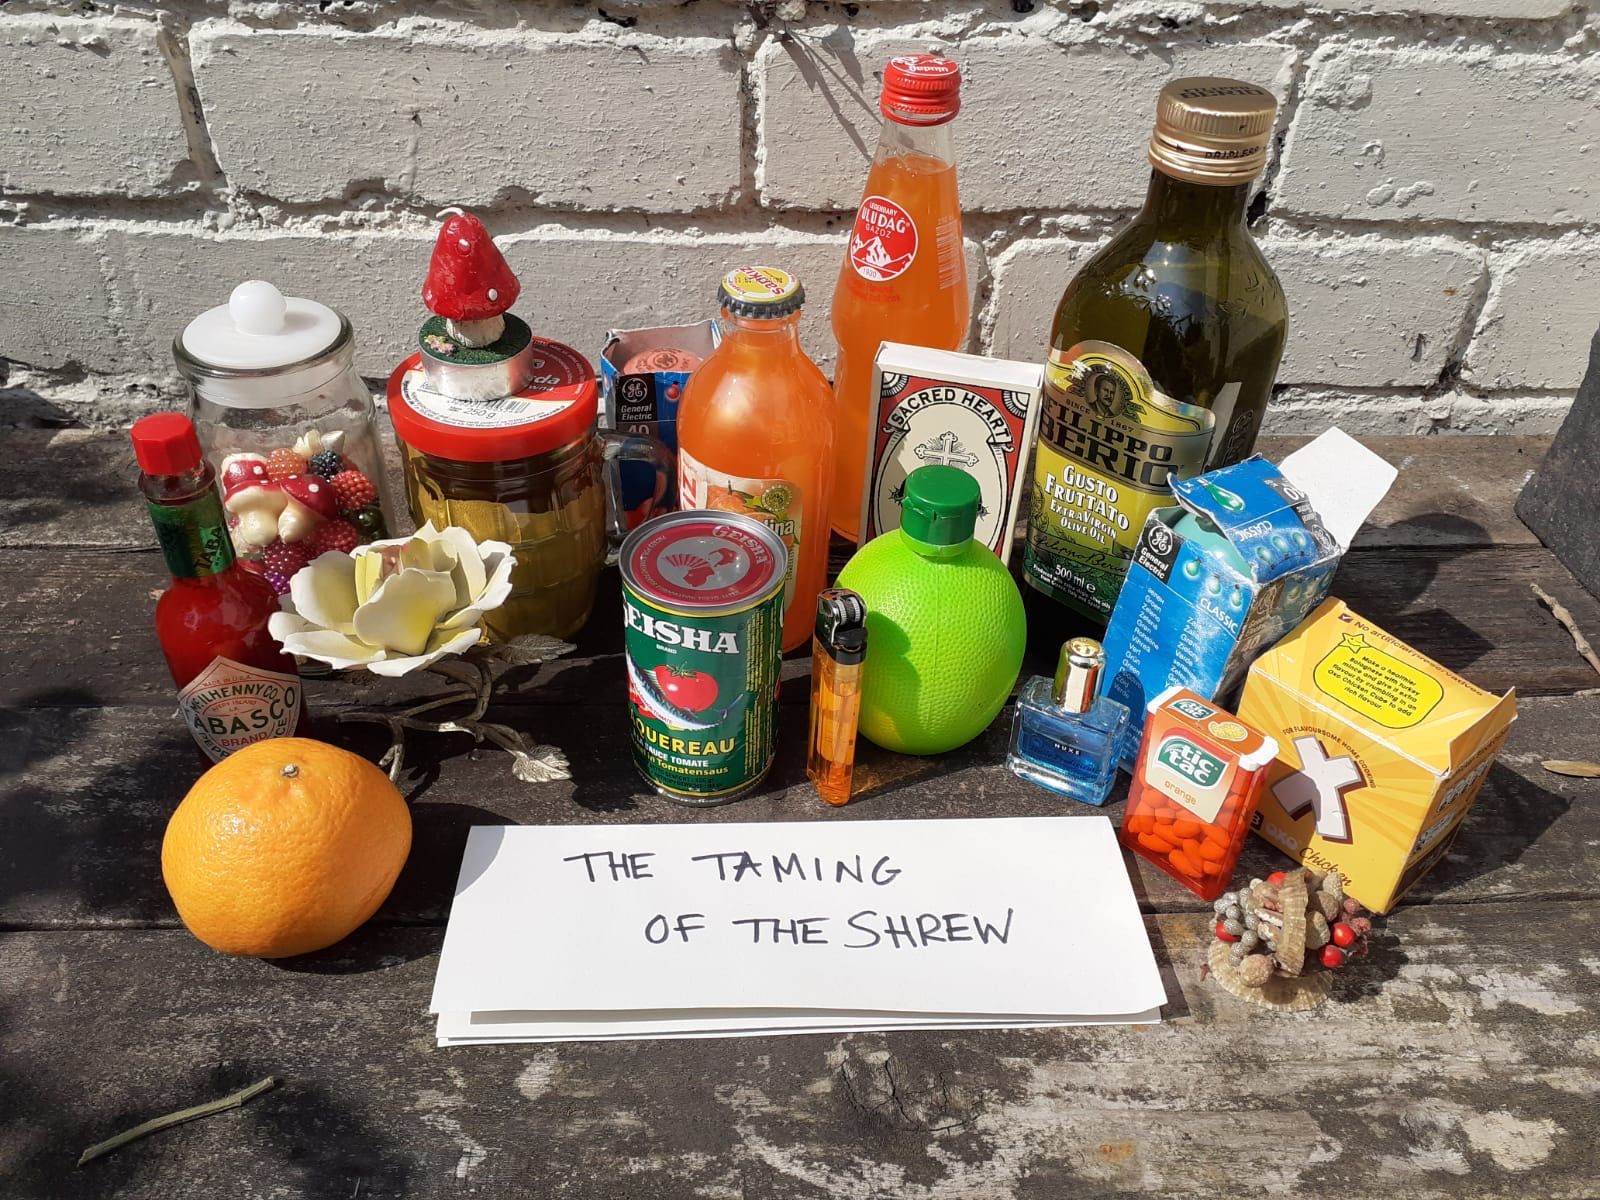 A collection of ordinary household items, plus a handwritten slip of paper saying, "The Taming of the Shrew"